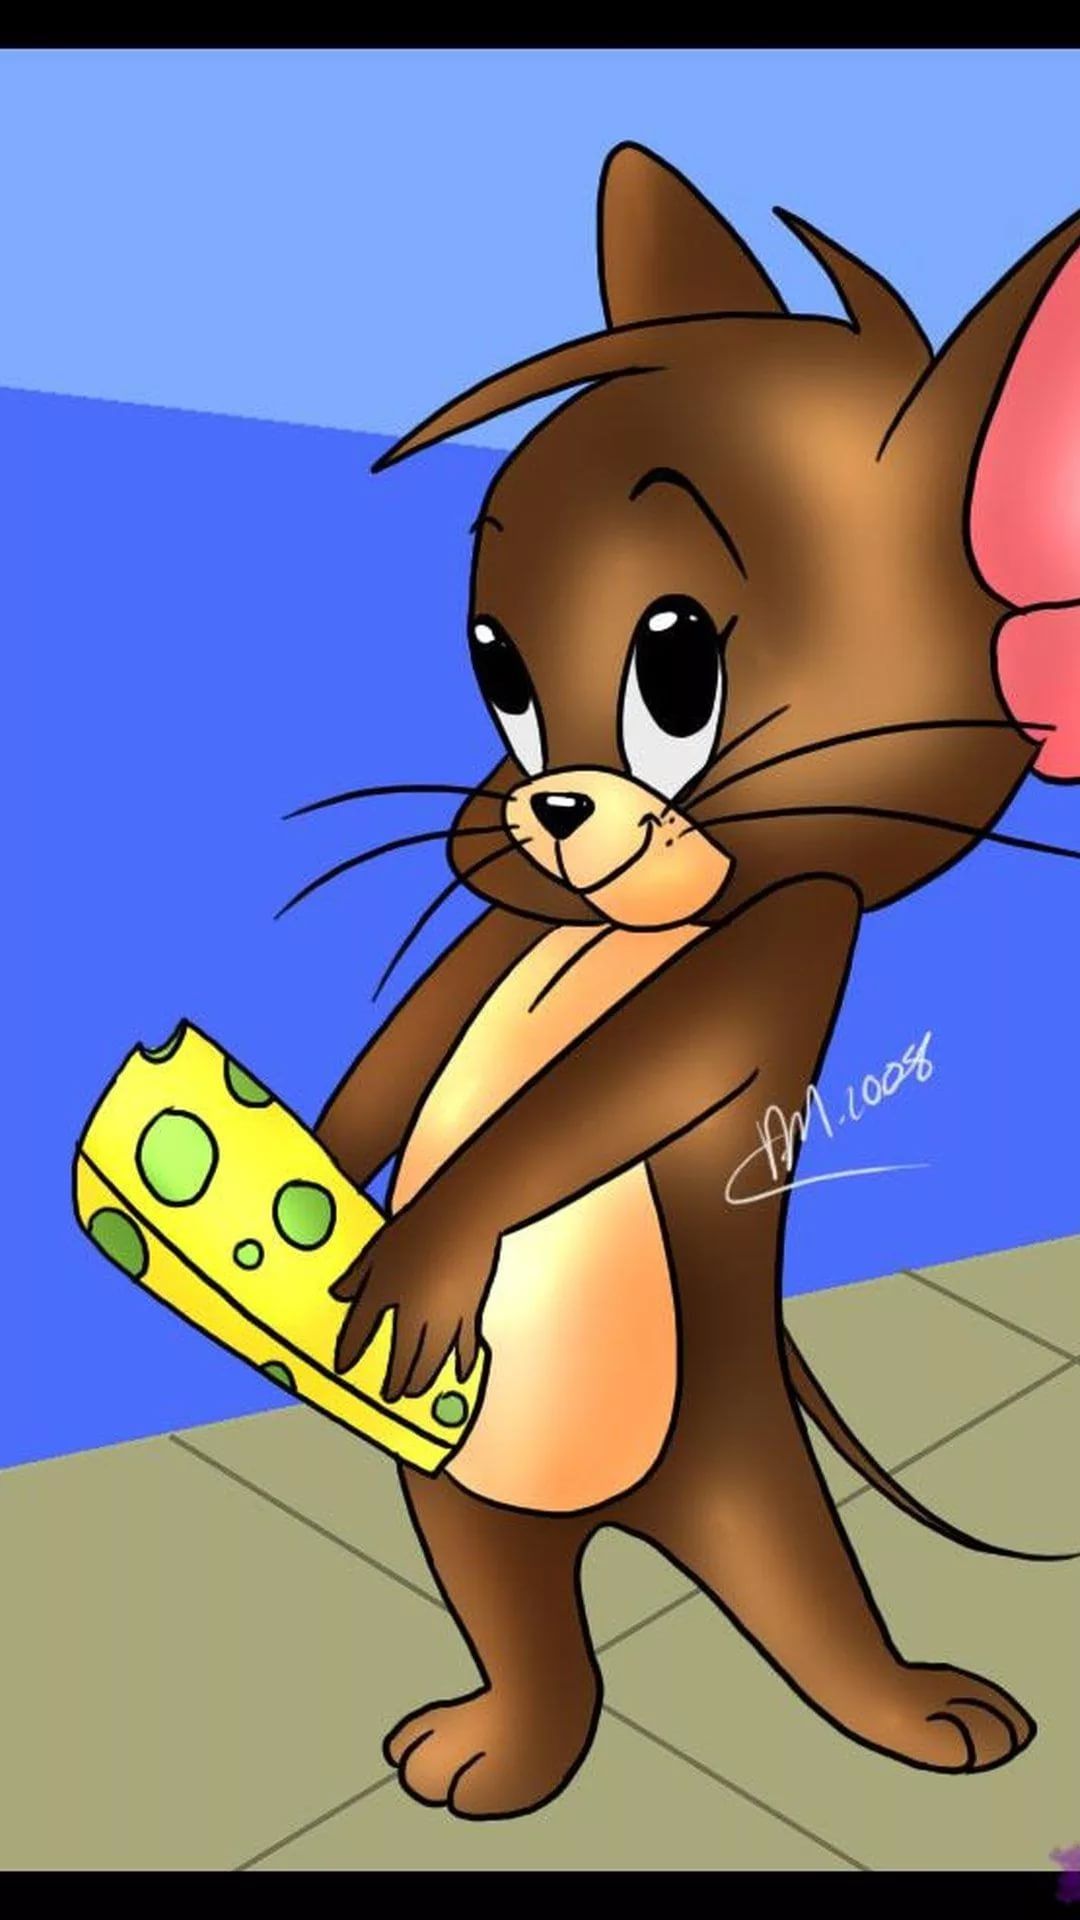 Tom And Jerry iPhone lock screen wallpaper